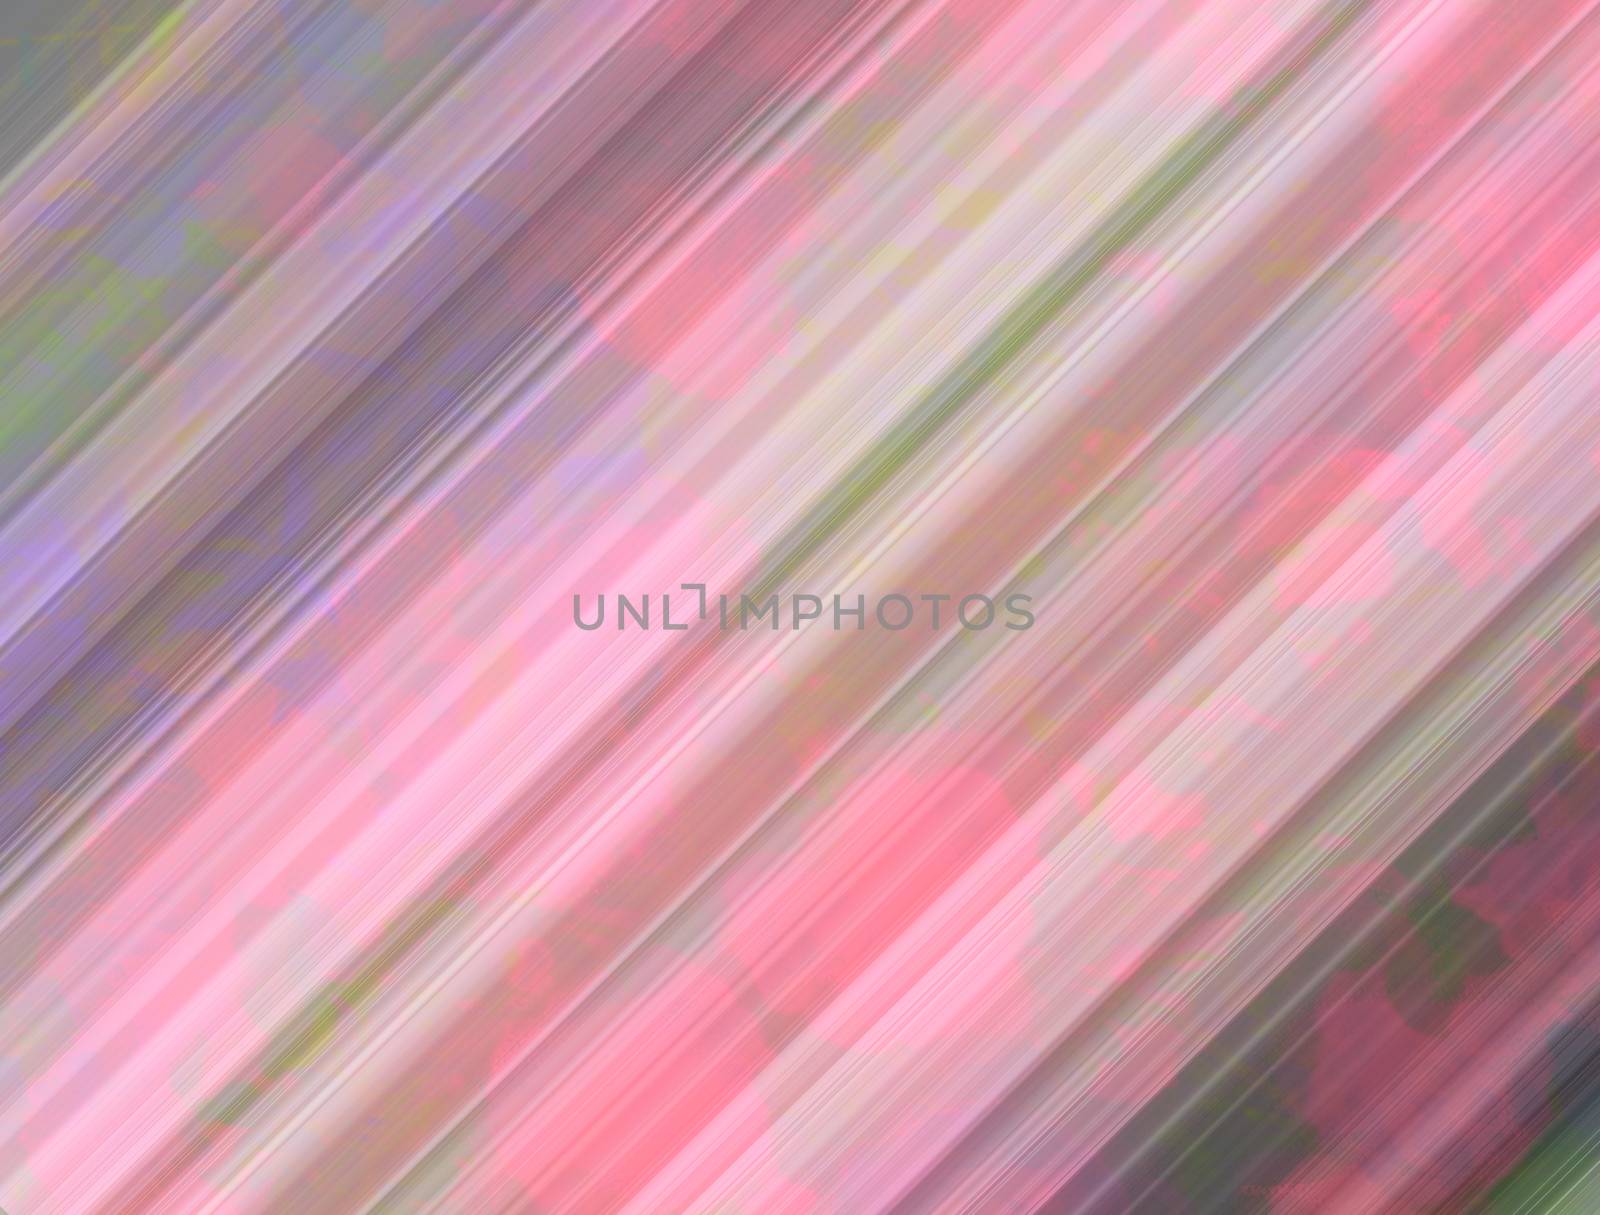 Abstract diagonal background for graphic design use